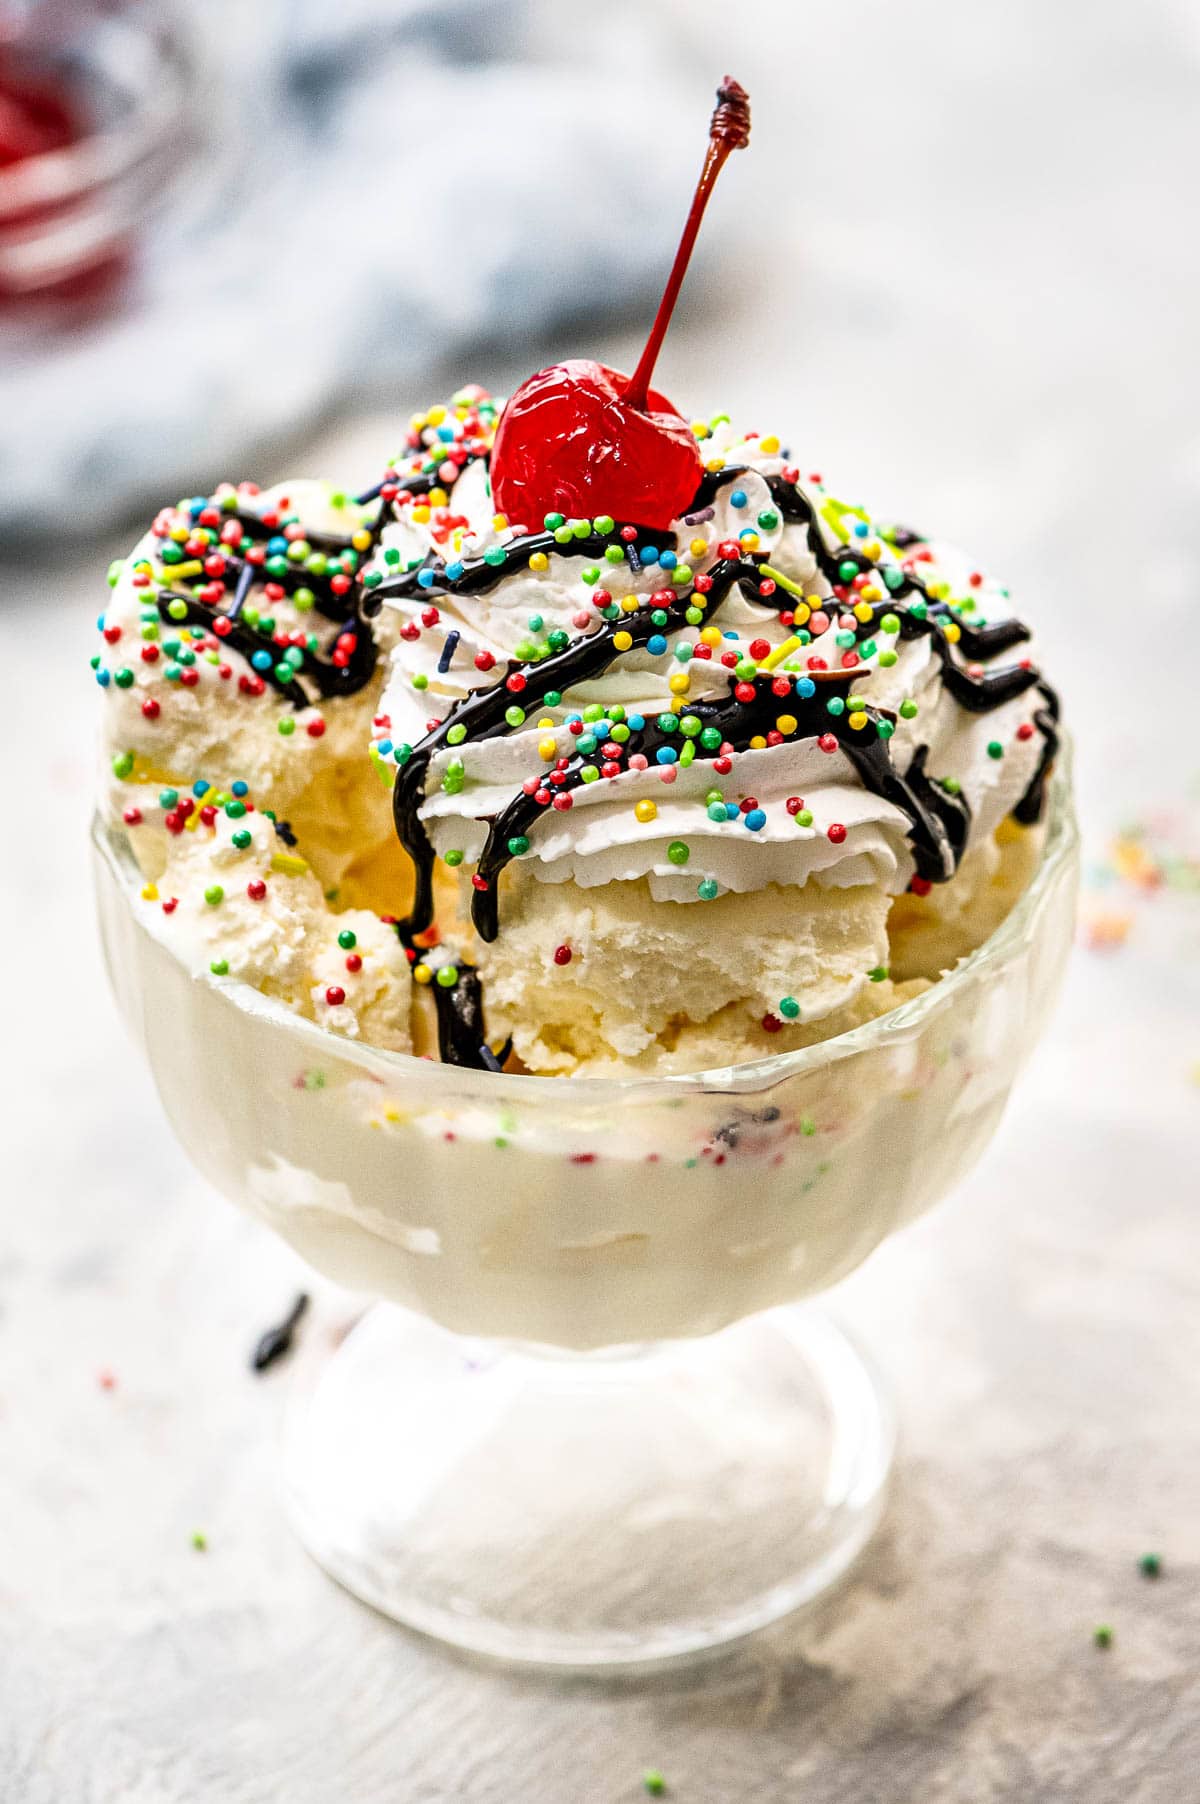 Glass bowl with ice cream, chocolate syrup, sprinkles and cherry on top